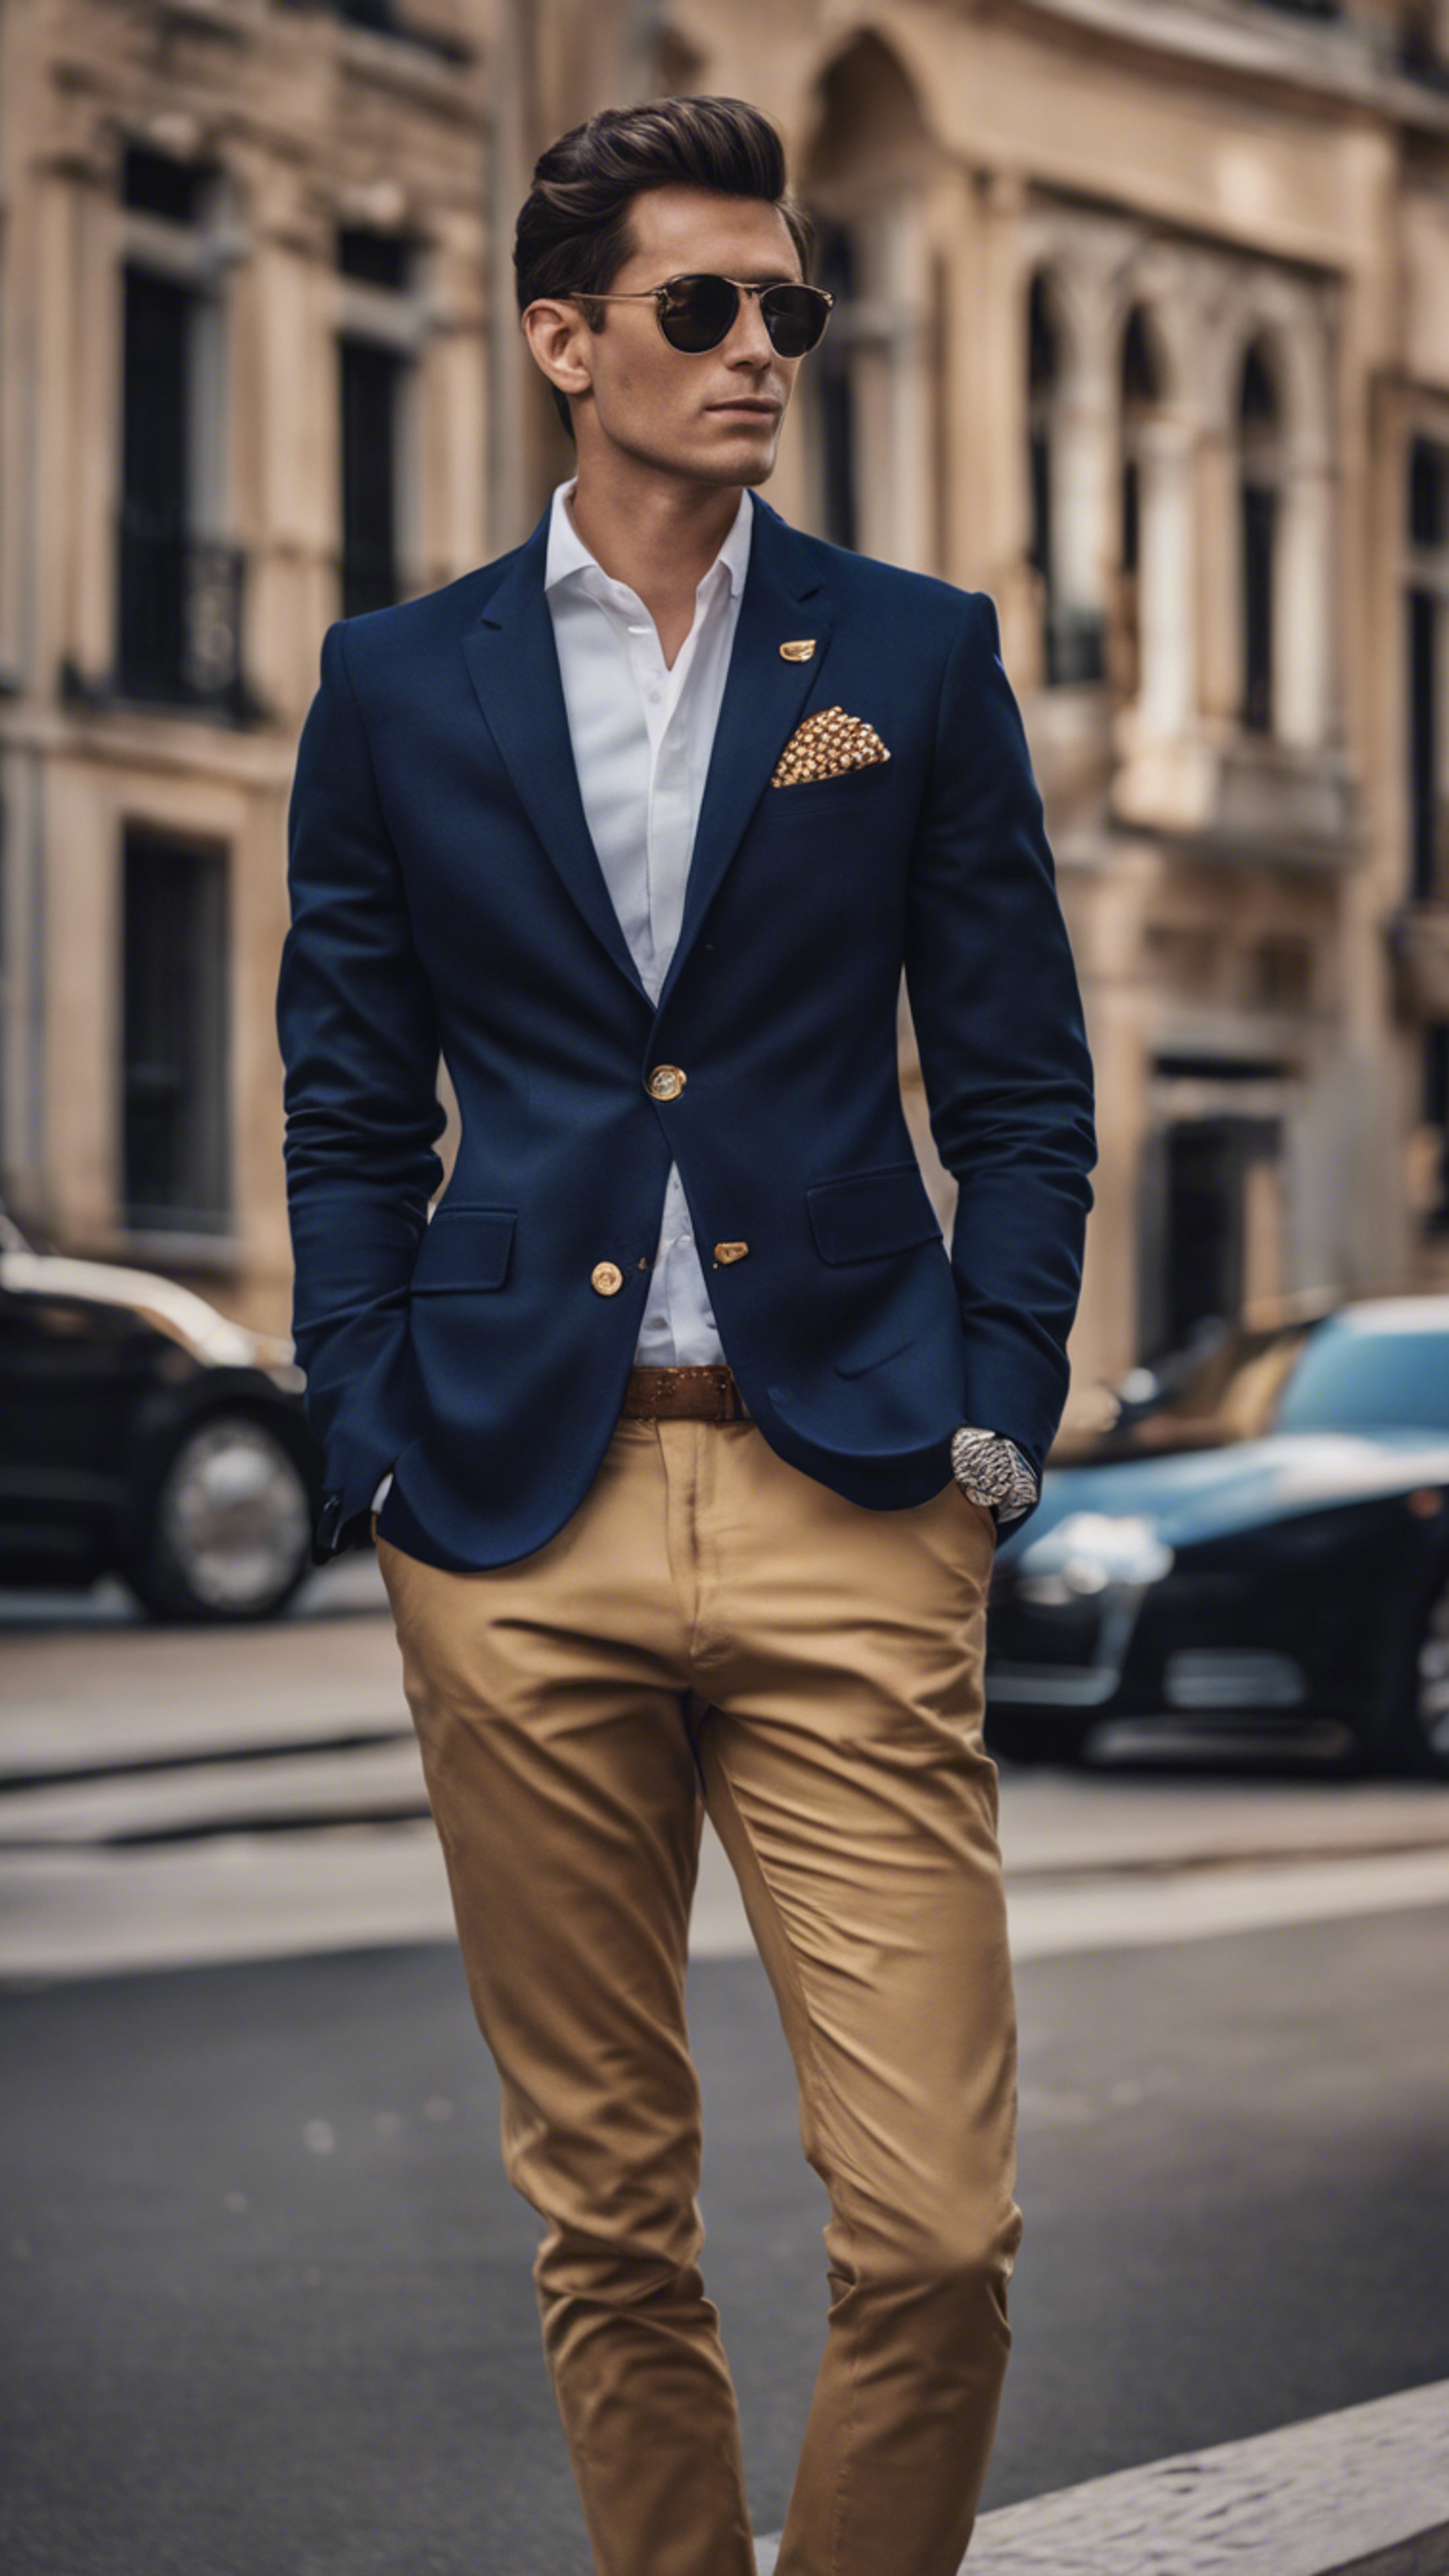 A preppy style male wearing a navy blazer with golden buttons. Wallpaper[81a126e7891348aa9b4e]